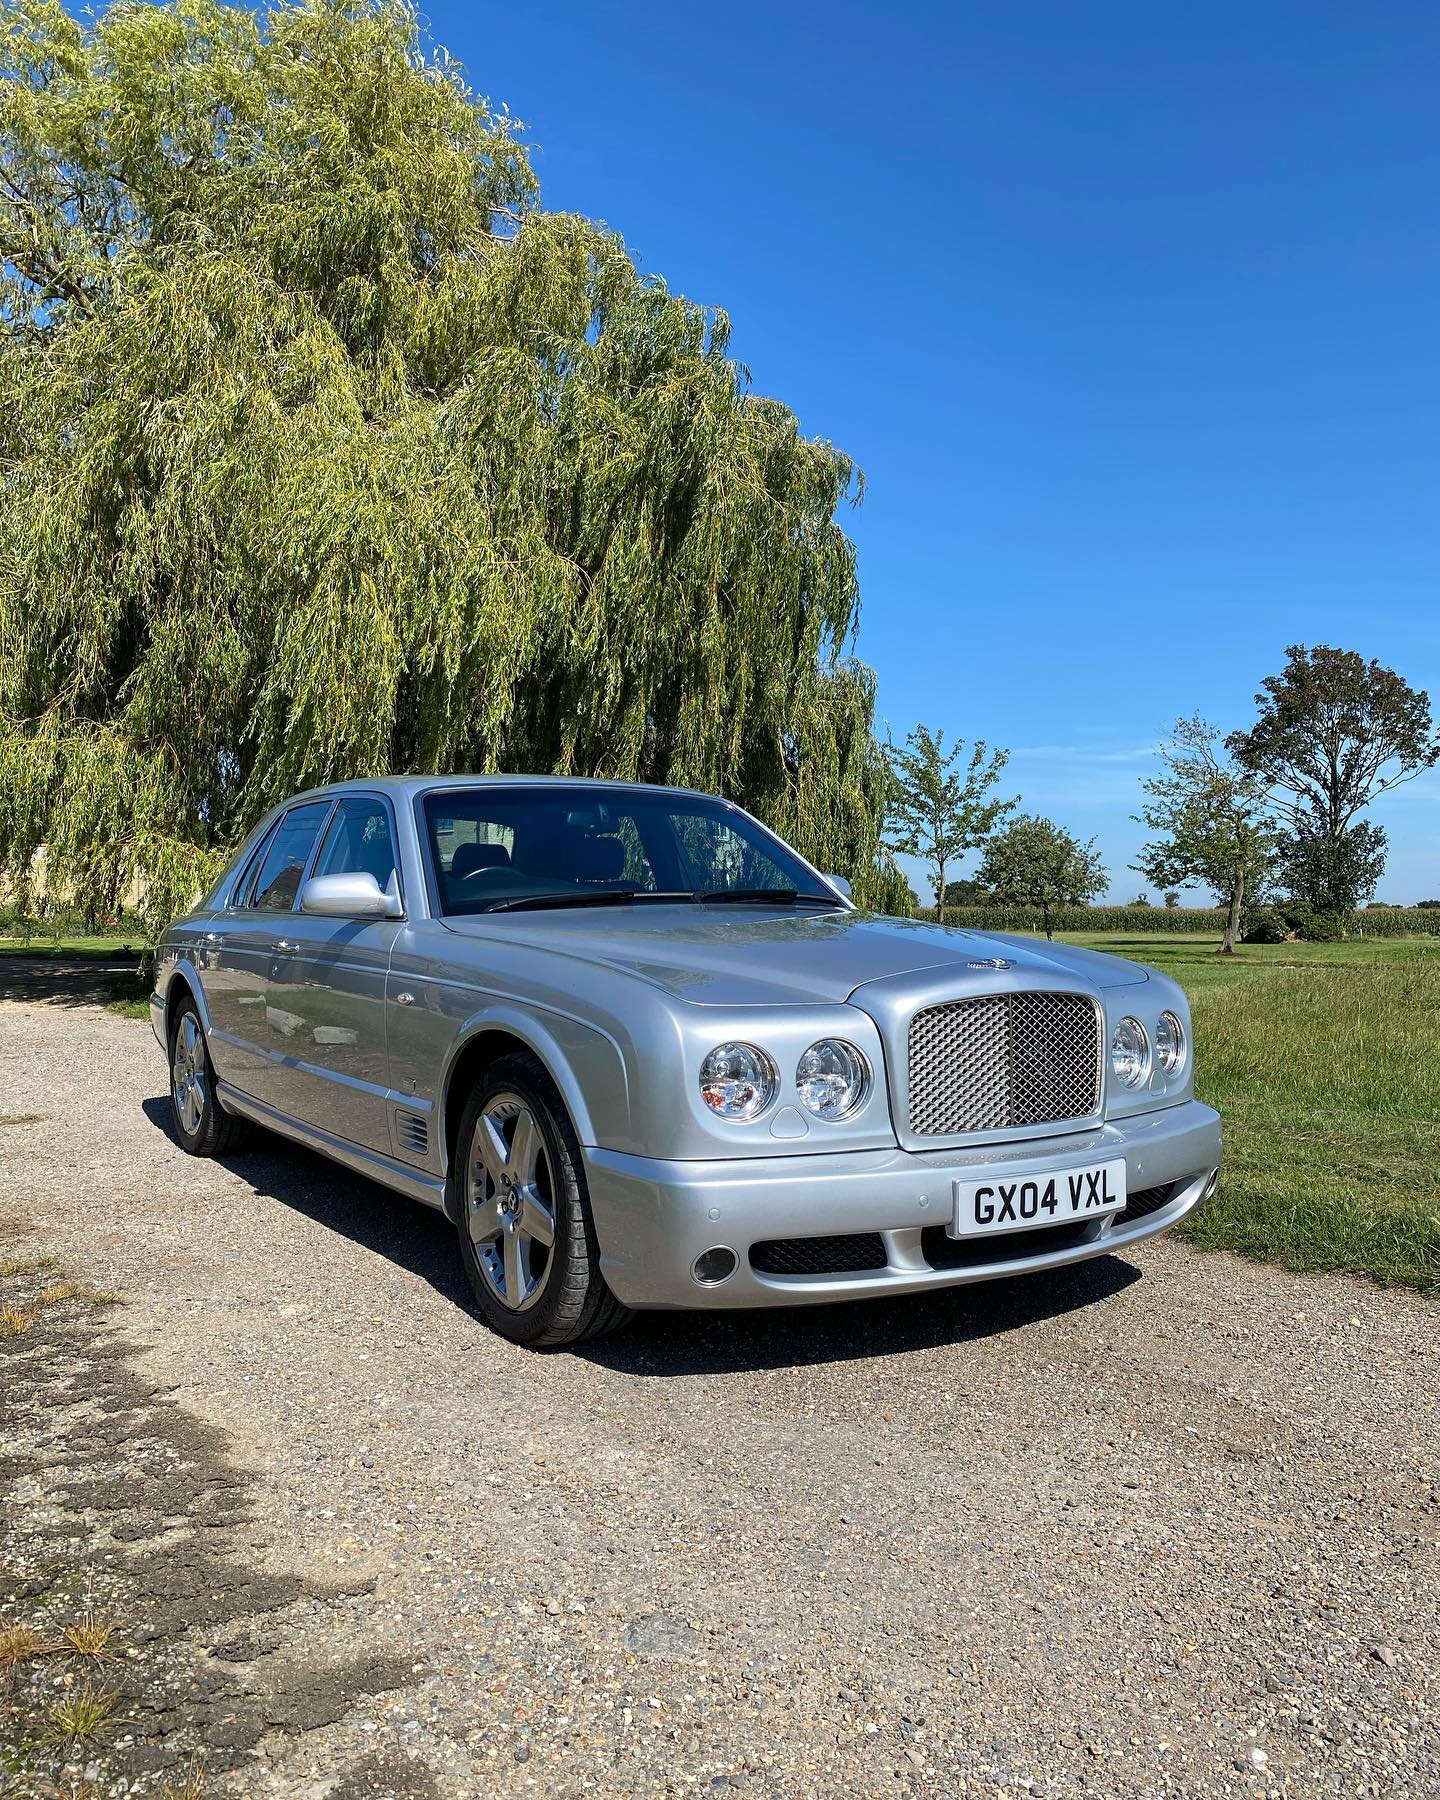 A true collectors item&hellip;

Had the pleasure of taking care of a few bits on this gorgeous 2004 #bentleyarnarge a while back, from a bumper scuff to a tight bonnet gap and a little bit of corrosion to deal with on the bootlid. 

Absolute #luxury 